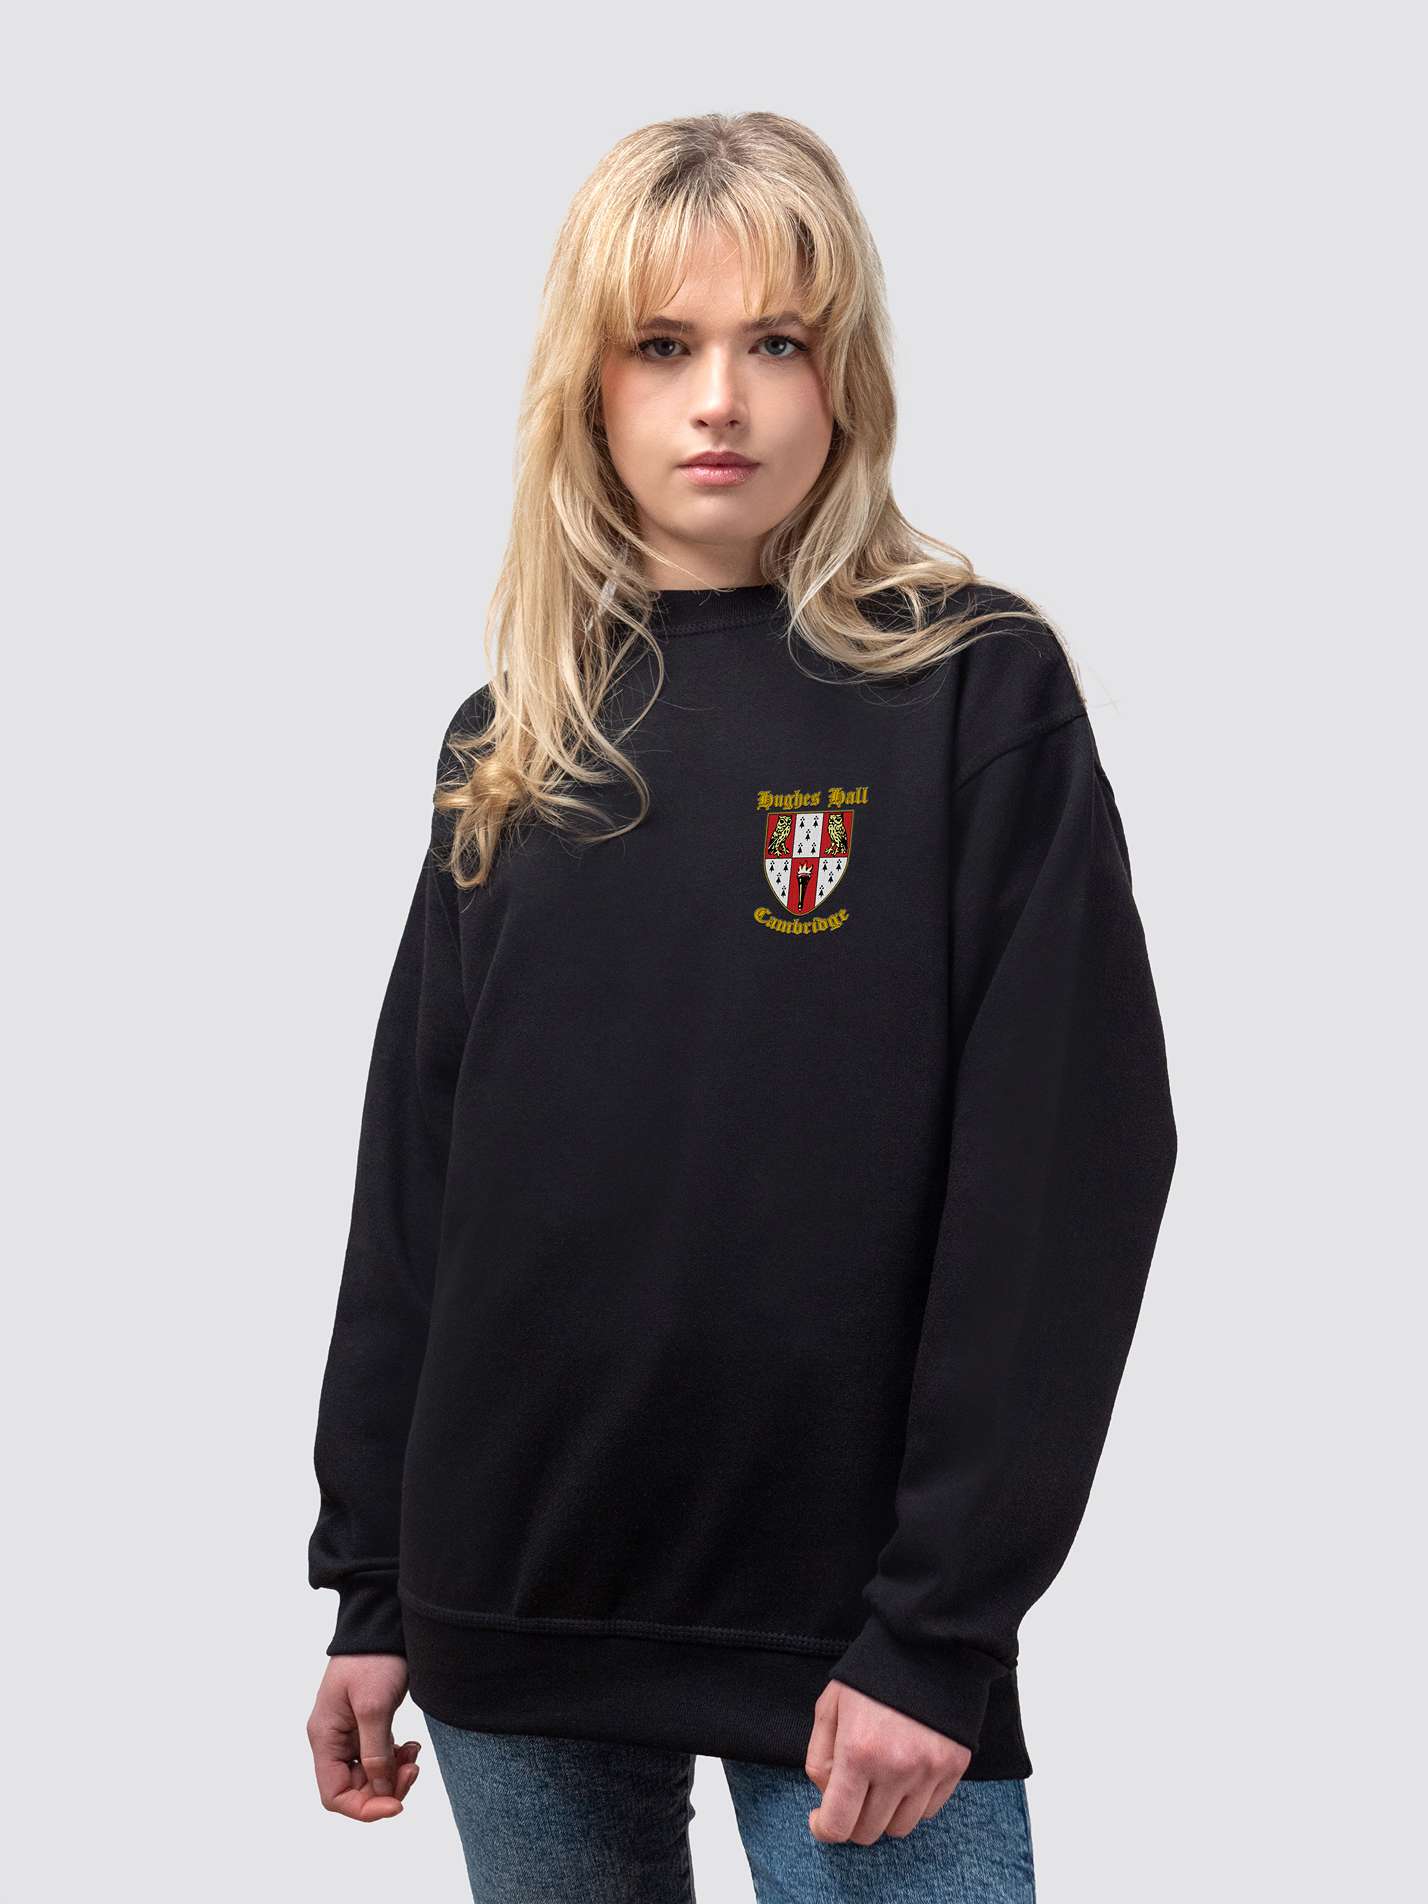 Hughes Hall crest on the front of a black, crew-neck sweatshirt